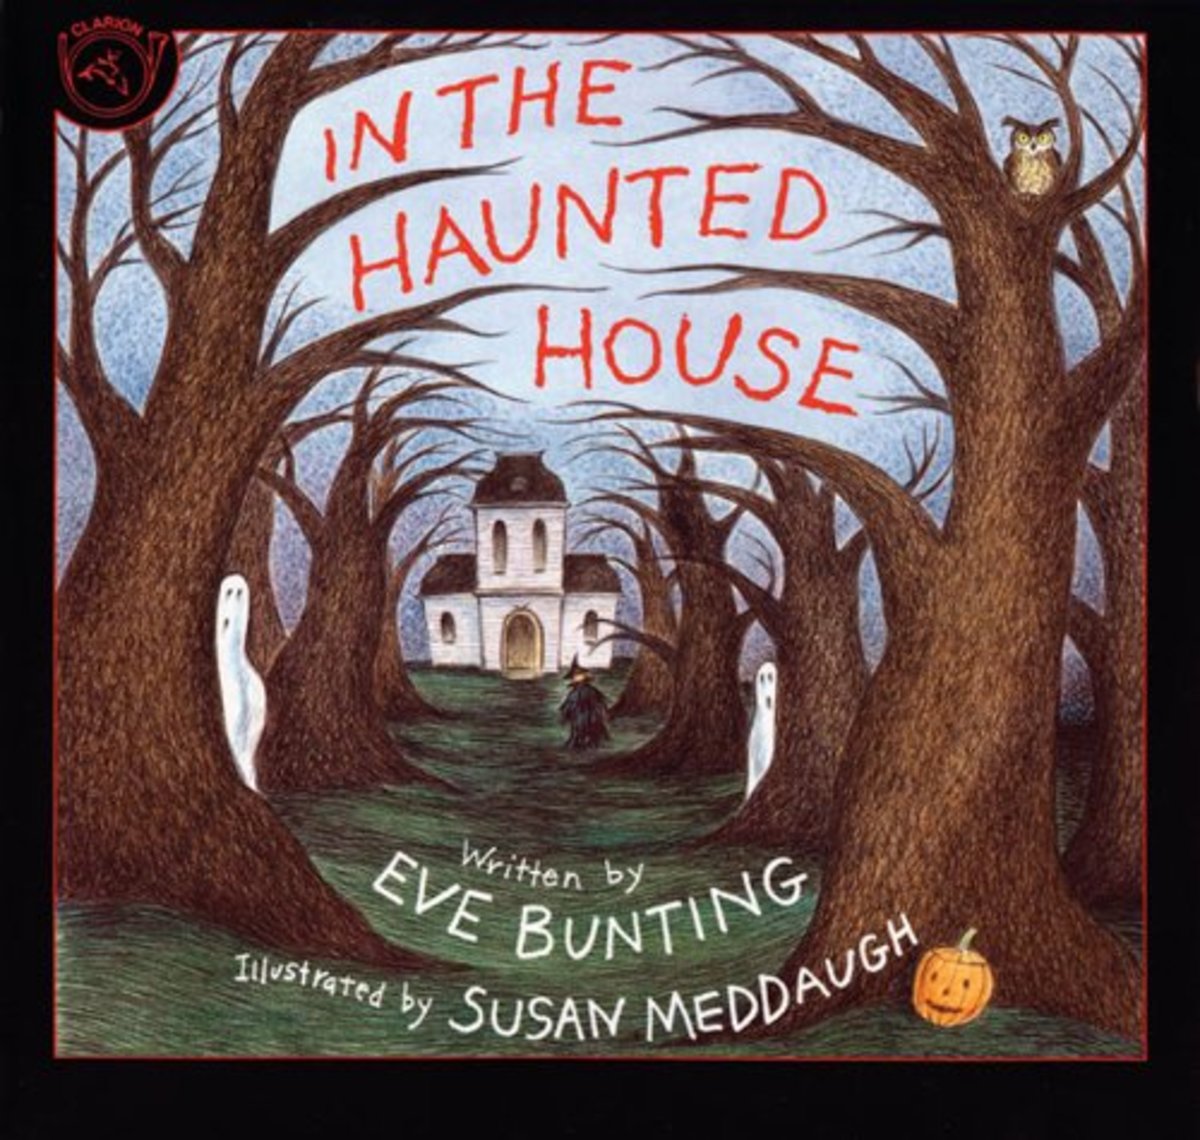 Eve Bunting's in the Haunted House, a Not Too Scary Children's Book Review